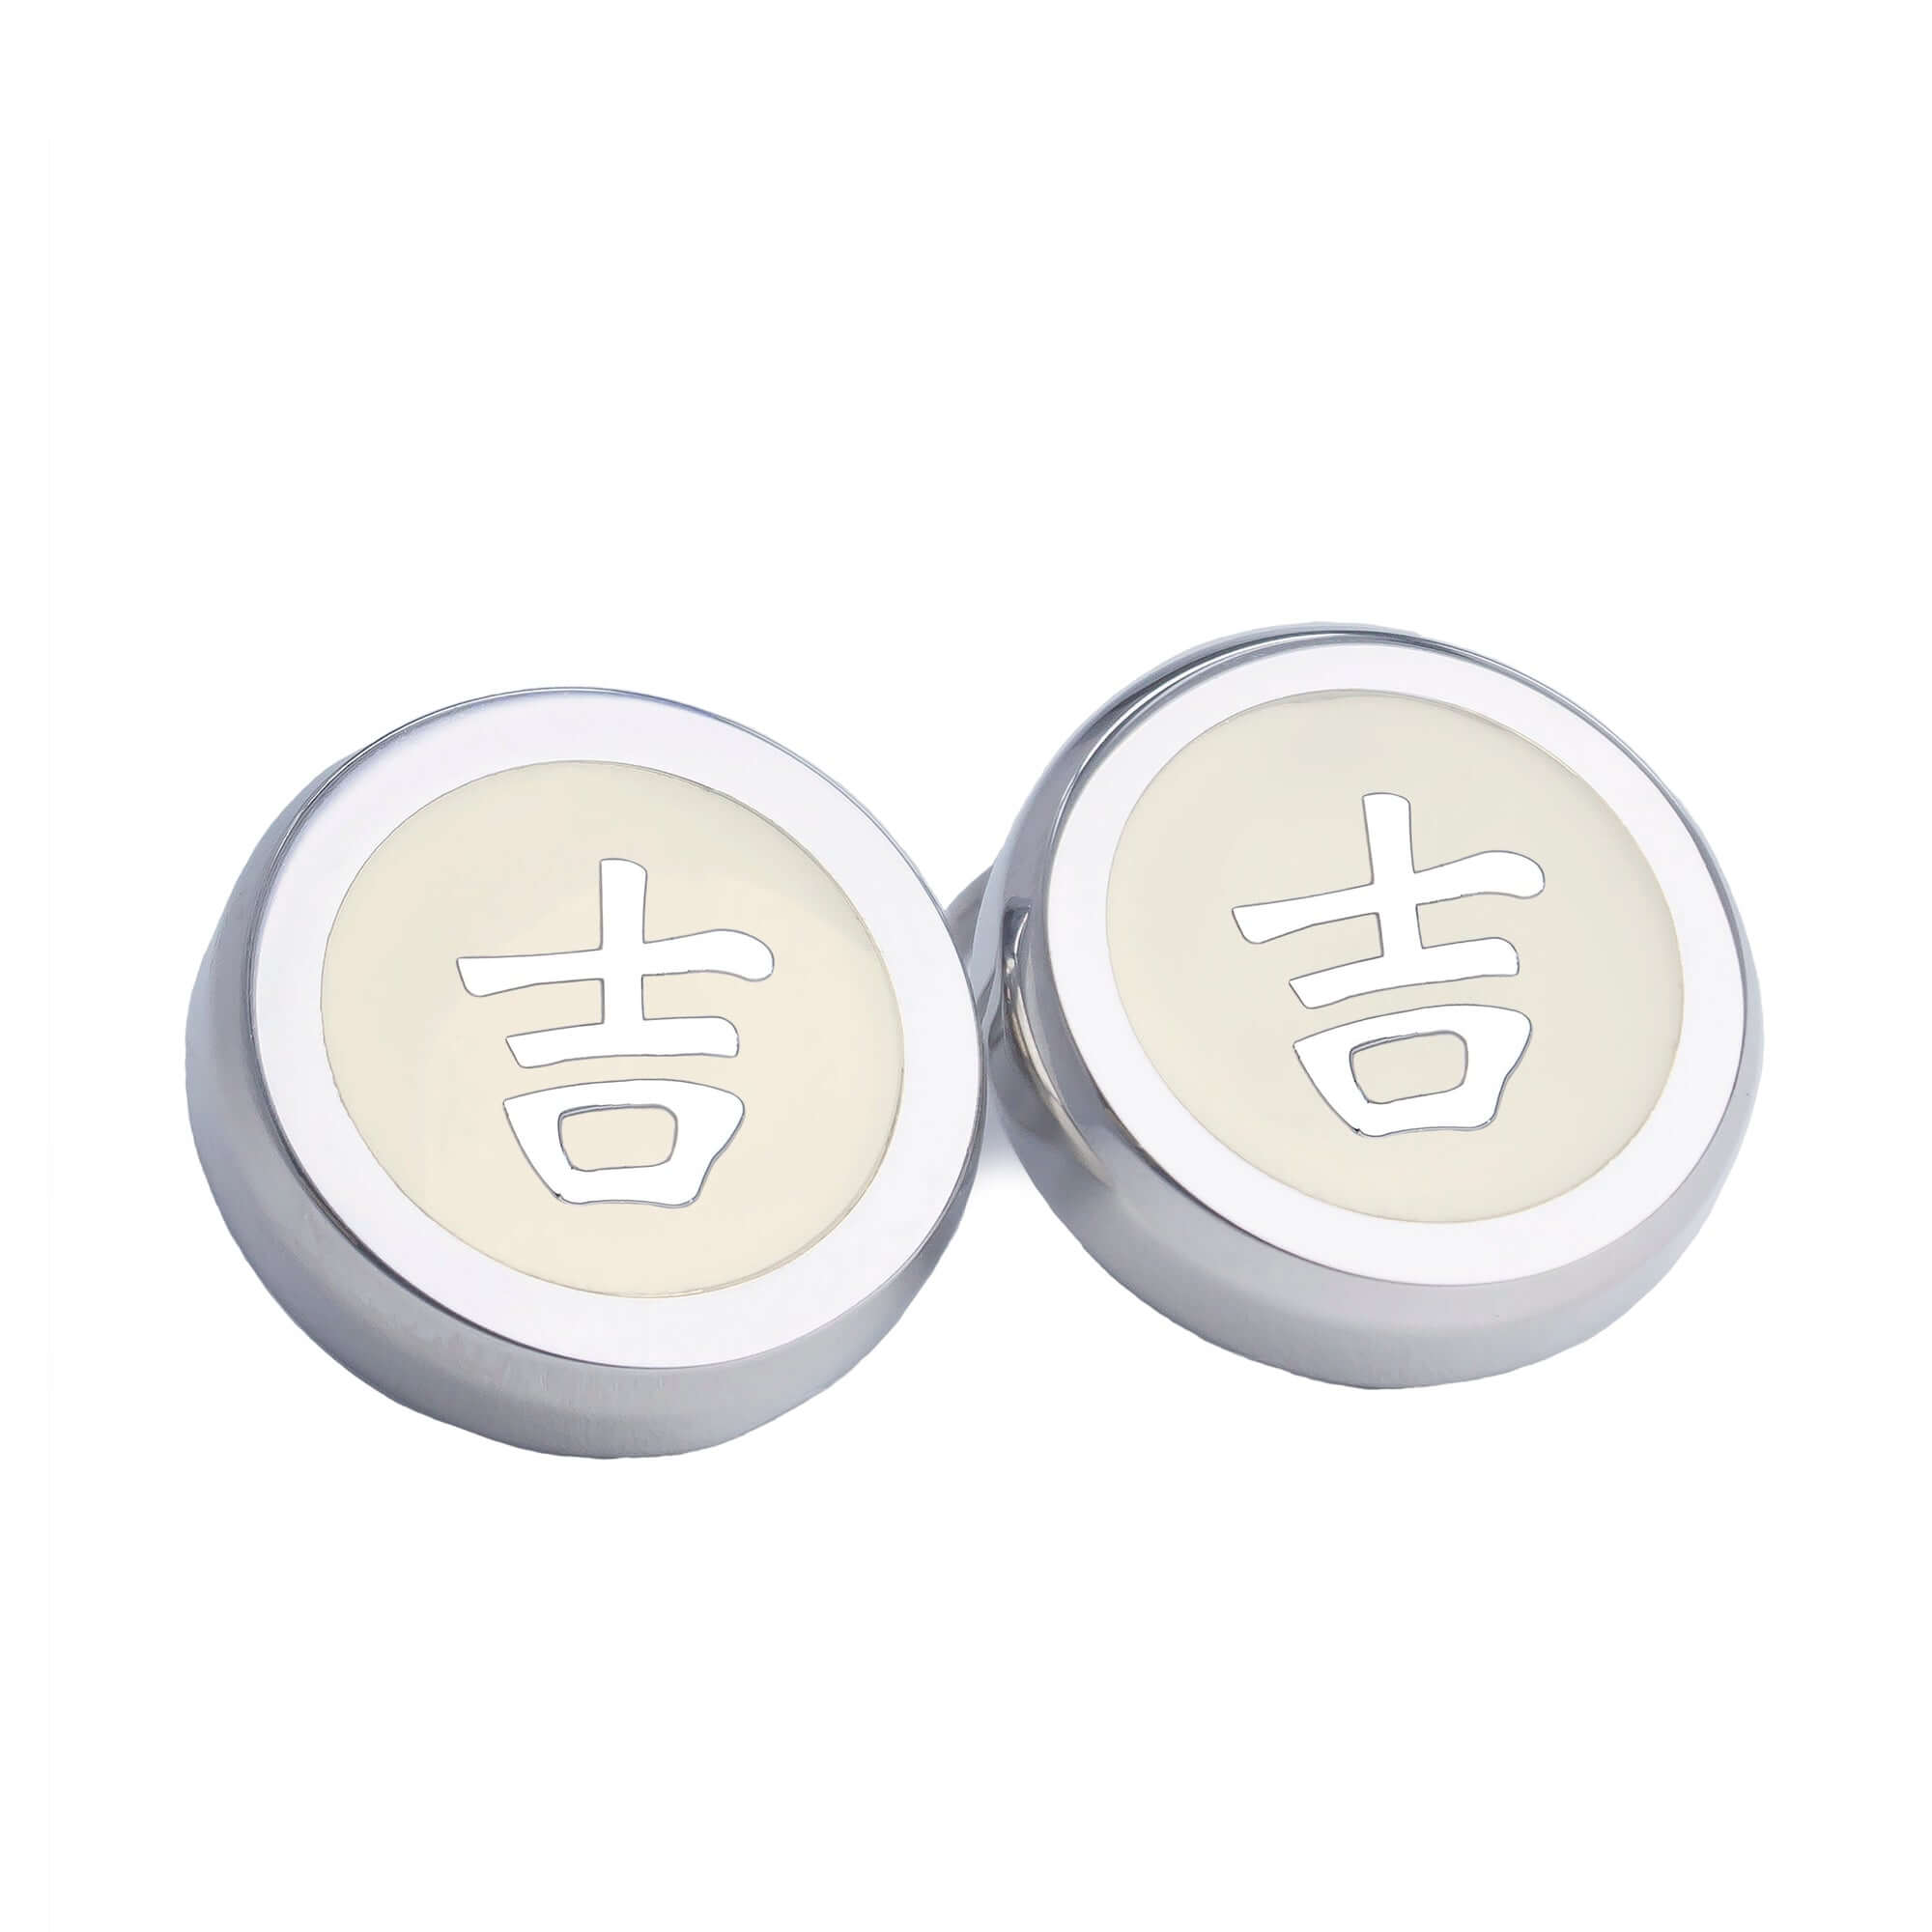 Chinese Character Silver Button Covers-Button Covers-A.Azthom-吉 Ji-Cufflinks.com.sg